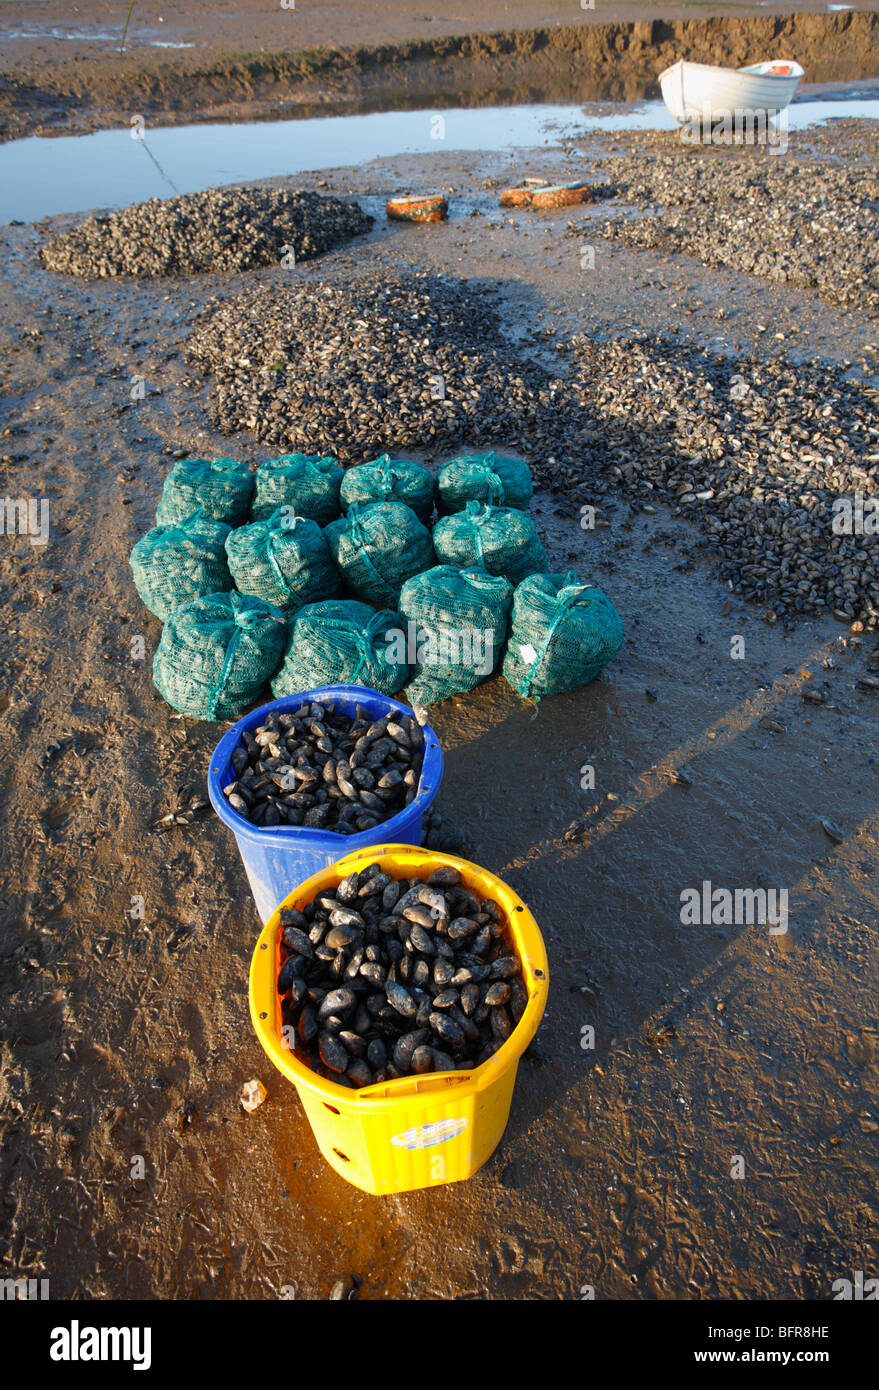 Buckets and bags of freshly caught mussels at Brancaster Staithe on the North Norfolk coast. A small boat is in the background. Stock Photo